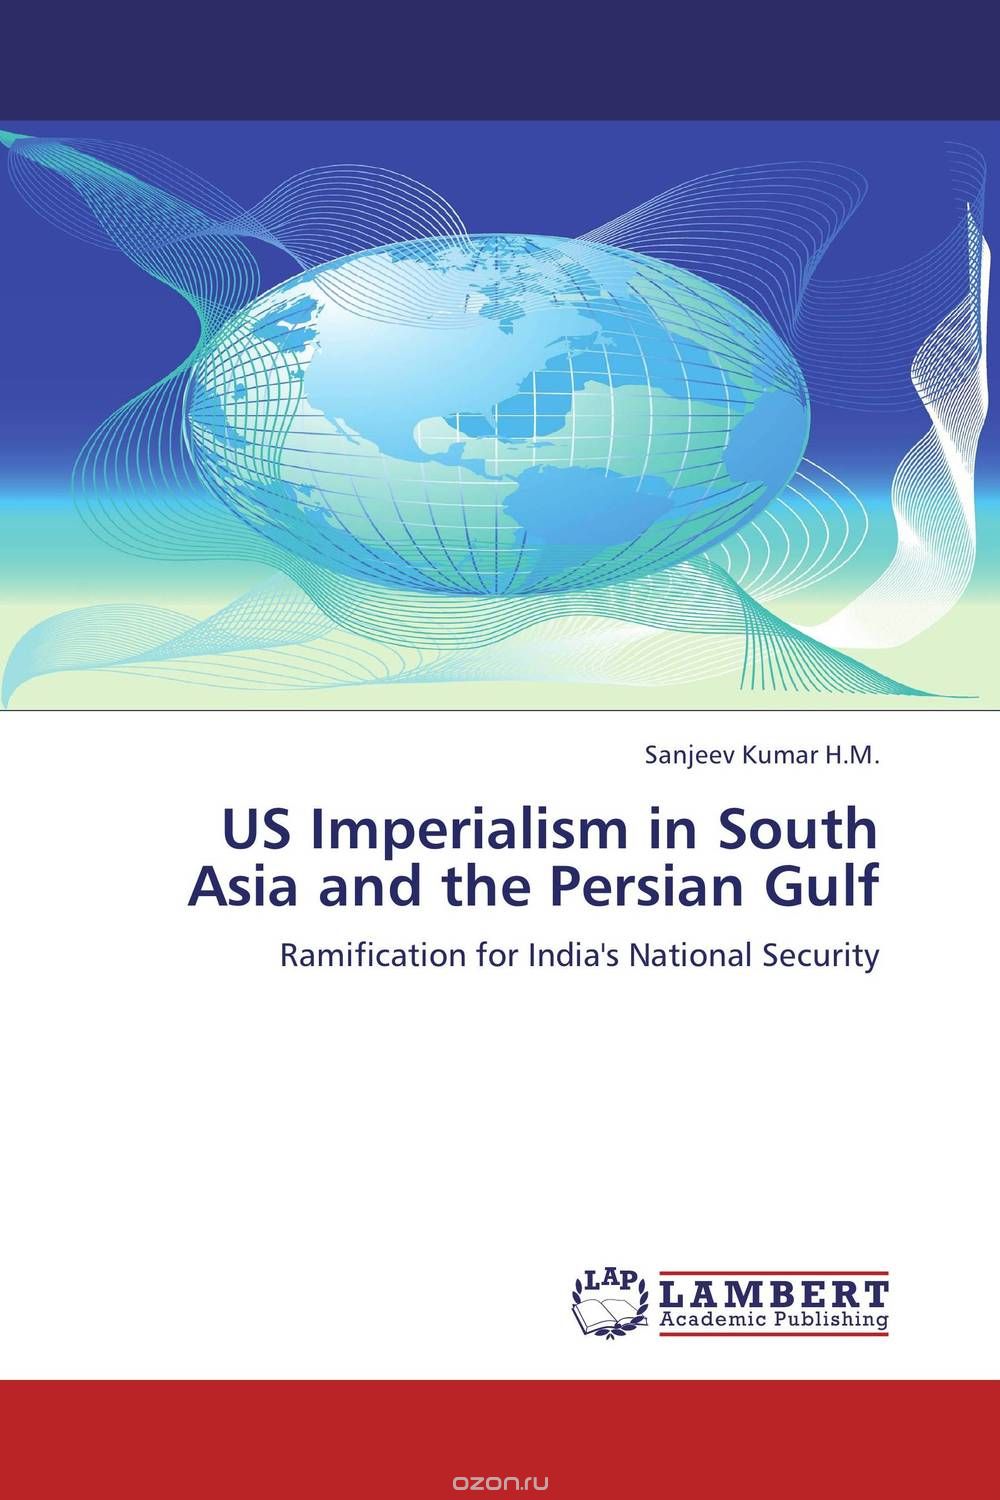 US Imperialism in South Asia and the Persian Gulf